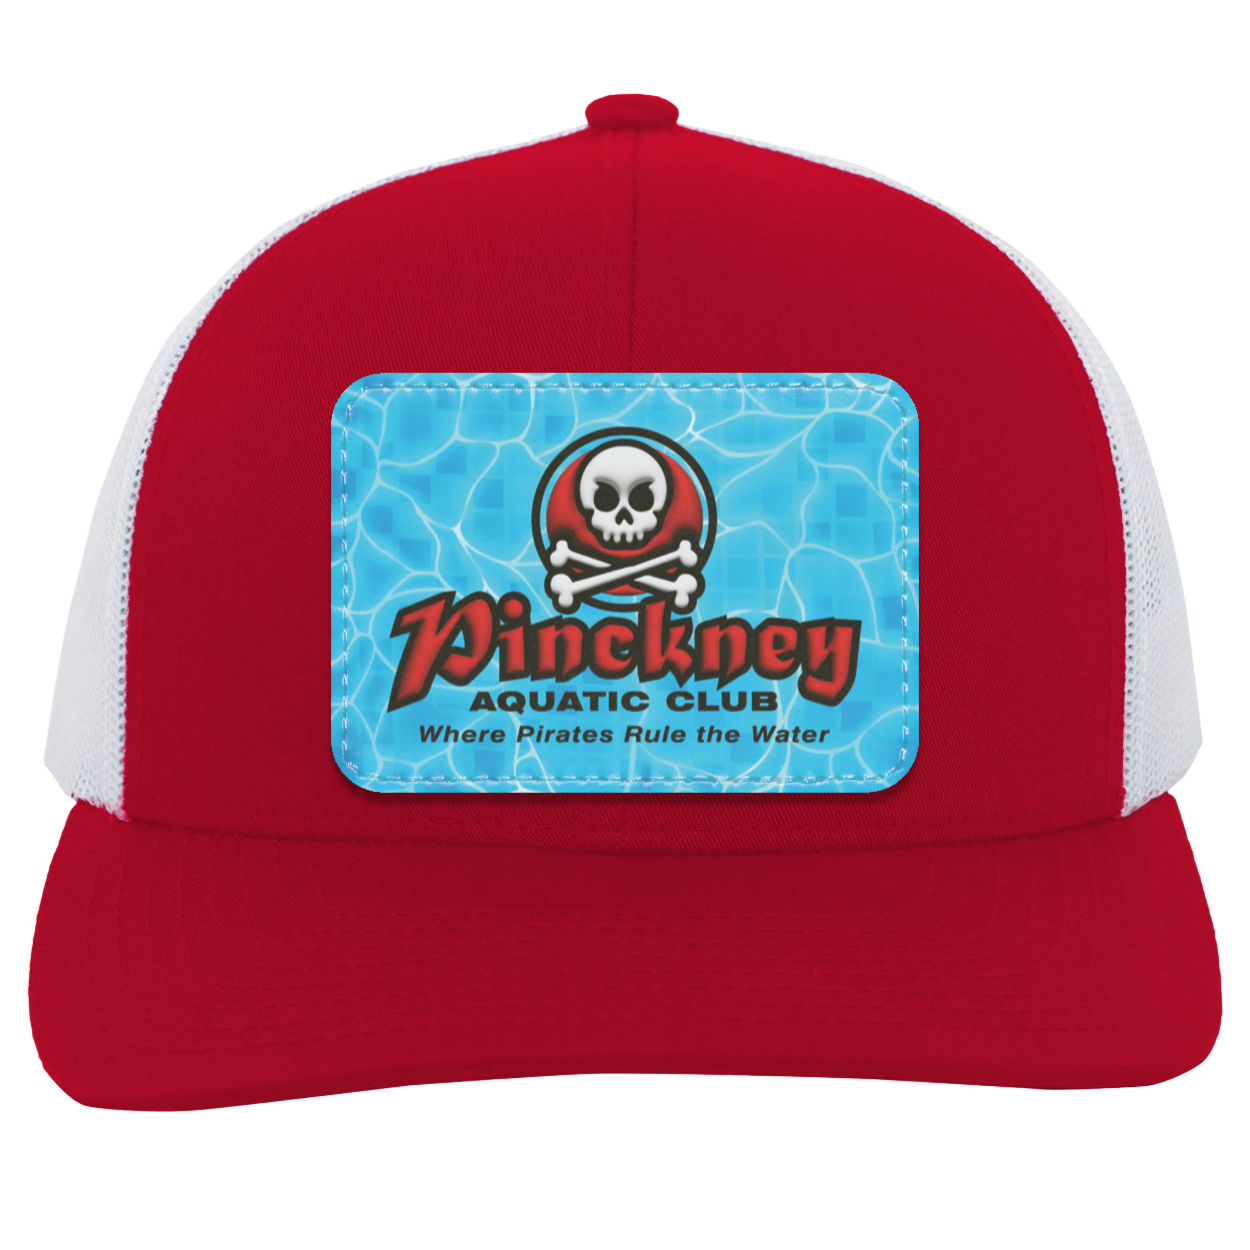 PAC 3D Pool 104C Trucker Snap Back - Patch